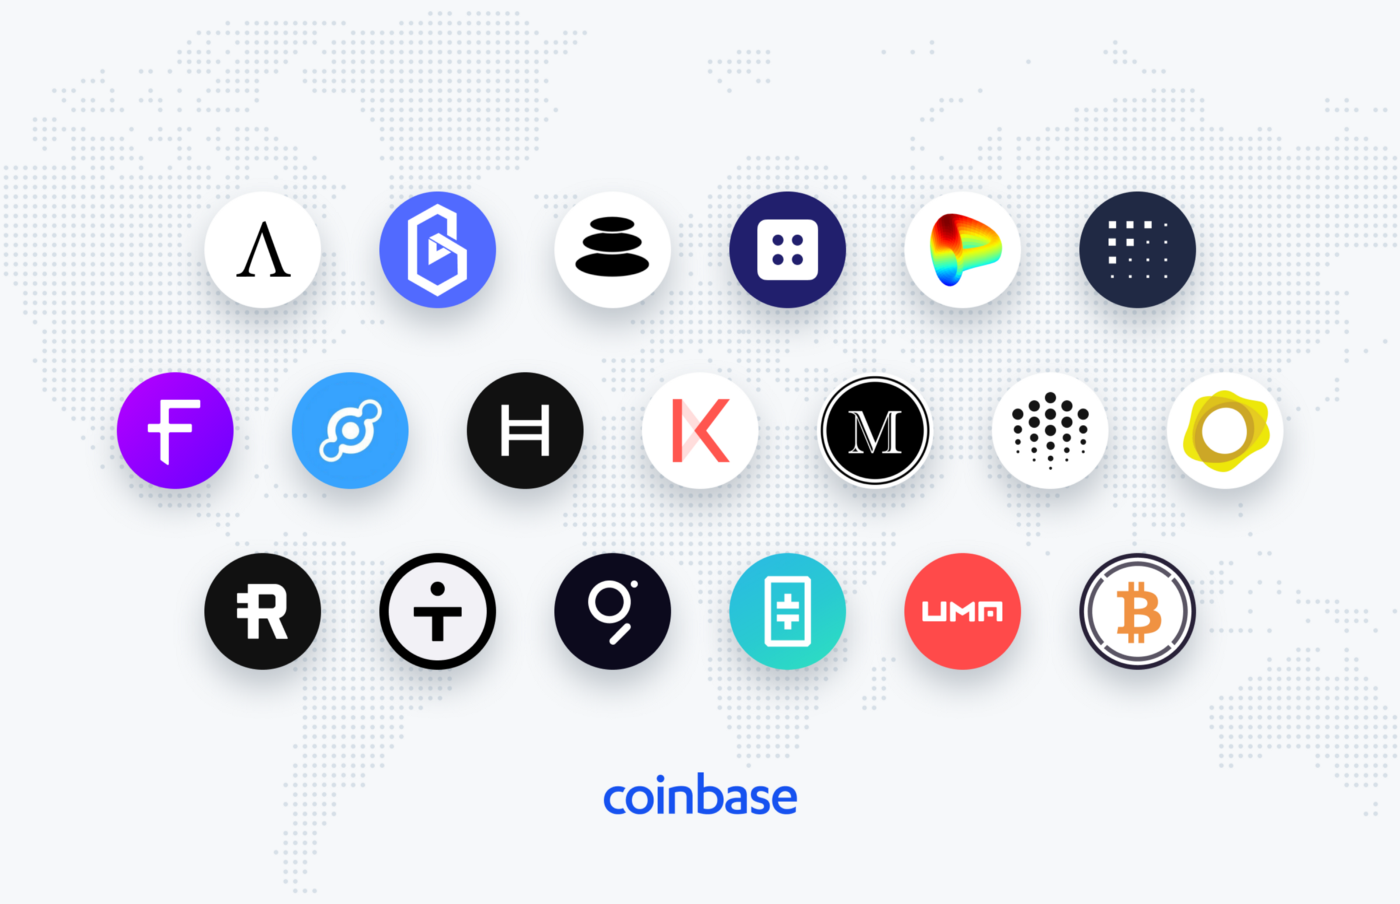 Coinbase continues to explore support for new digital assets